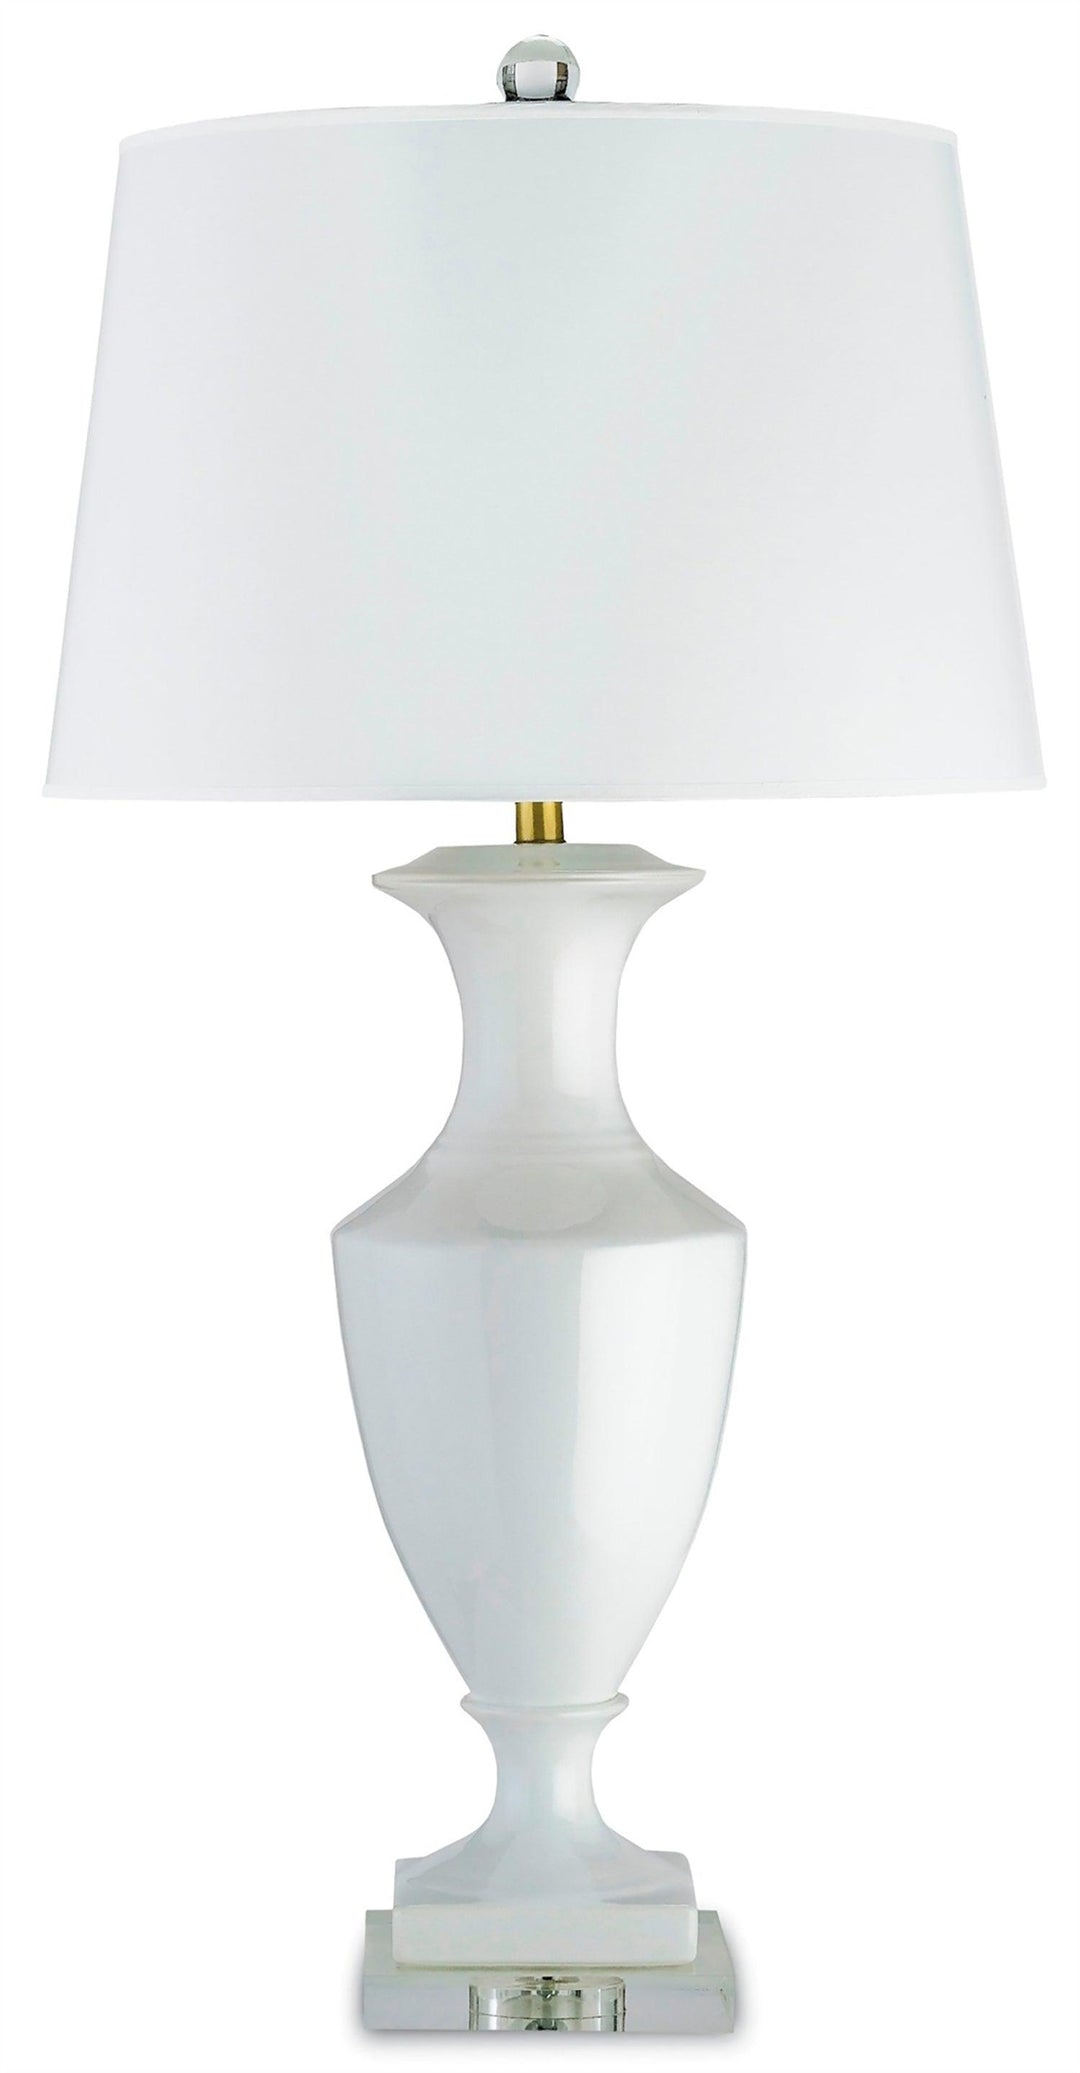 Timeless White Table Lamp - Casey & Company